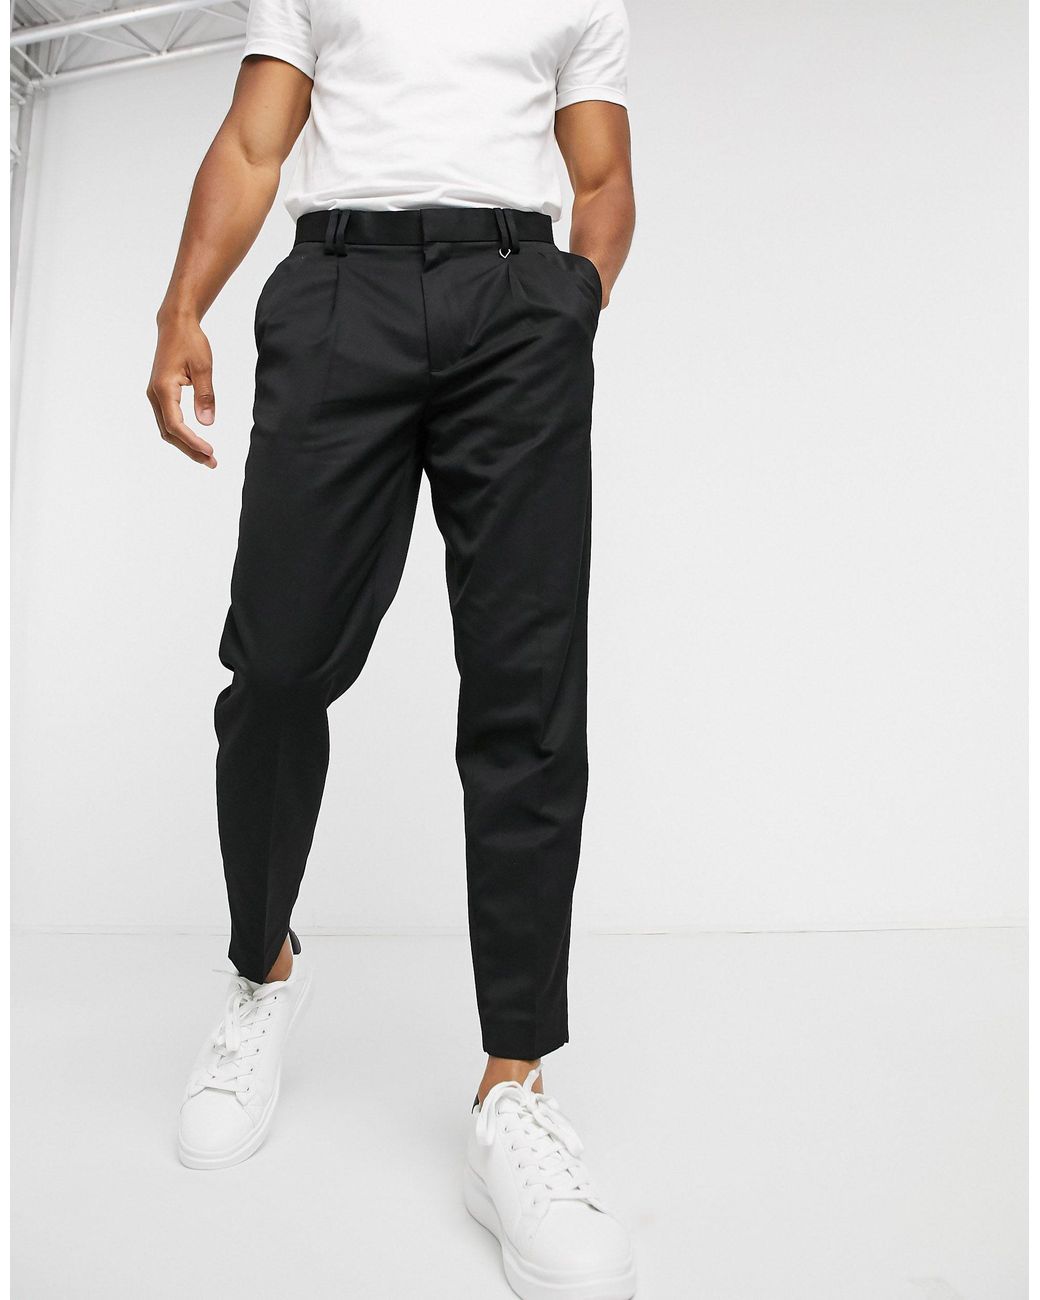 Buy Arrow Men Grey Tapered Fit Formal Trousers  Trousers for Men 632218   Myntra